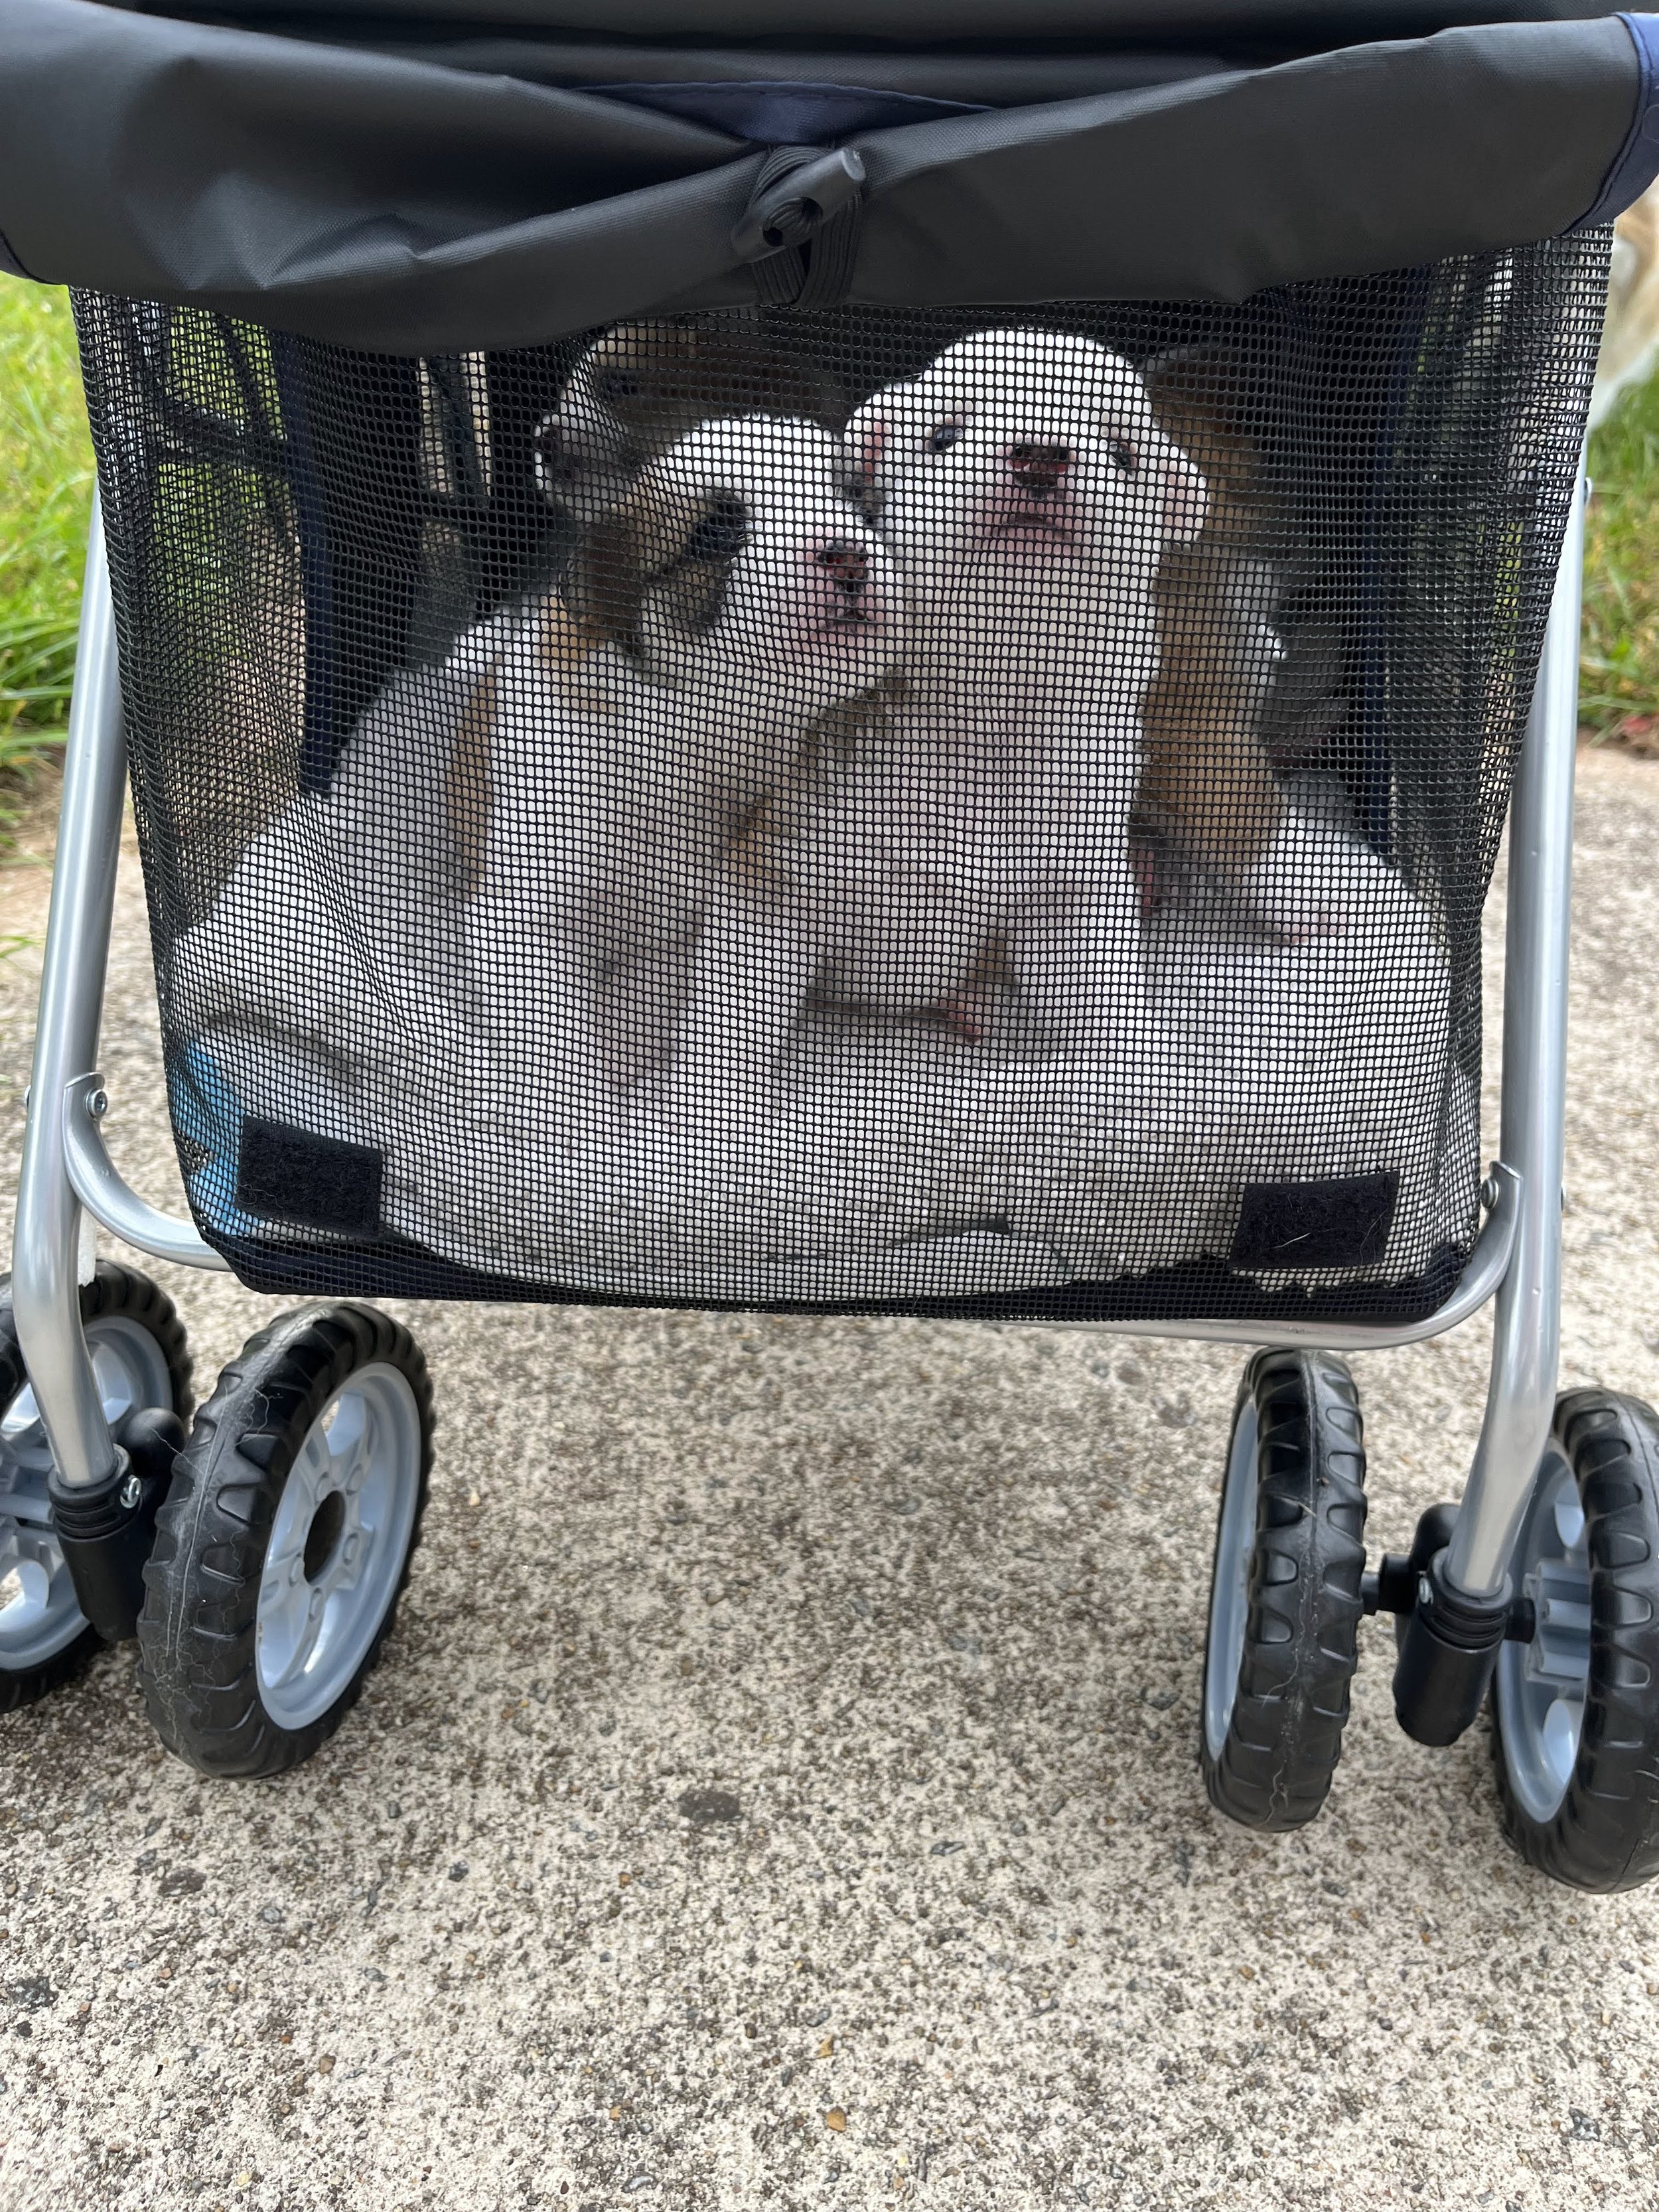 beta_and_grigri_in_stroller.jpeg